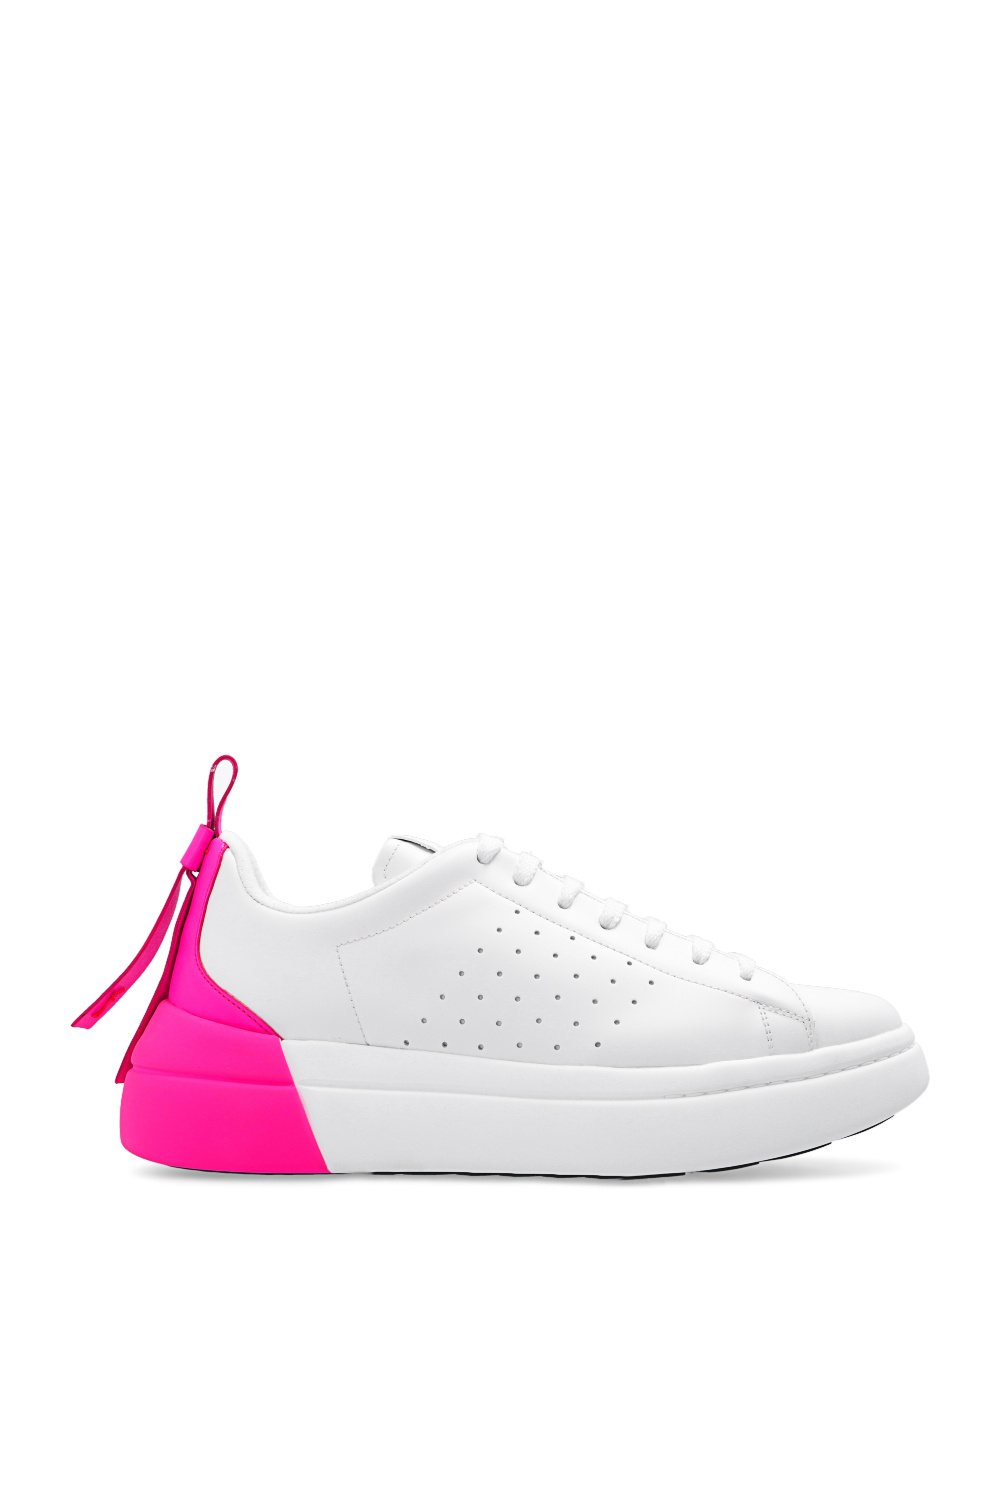 Red Valentino ‘Bowalk’ sneakers